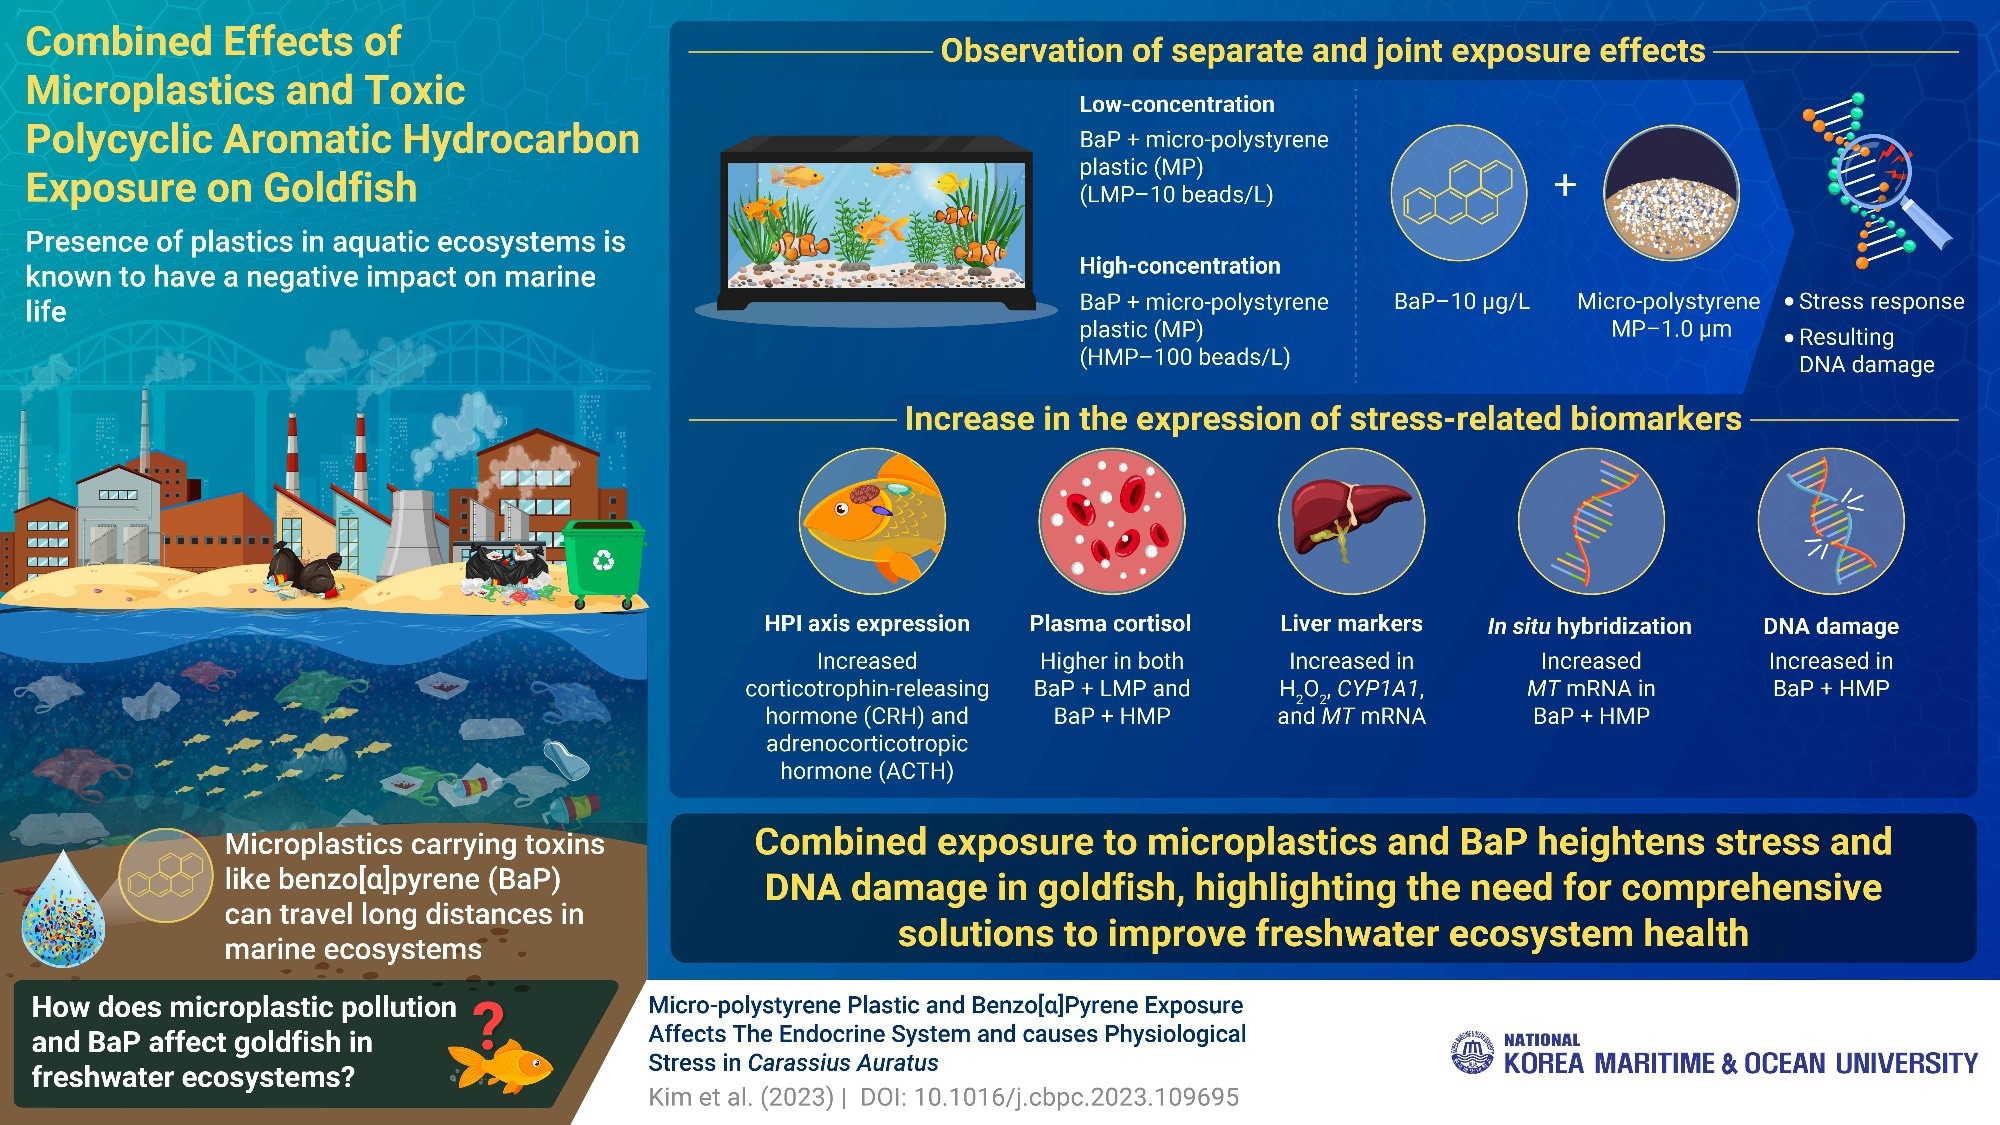 National Korea Maritime and Ocean University Researchers Explore the Impact of Microplastics and Toxin Exposure on Goldfish